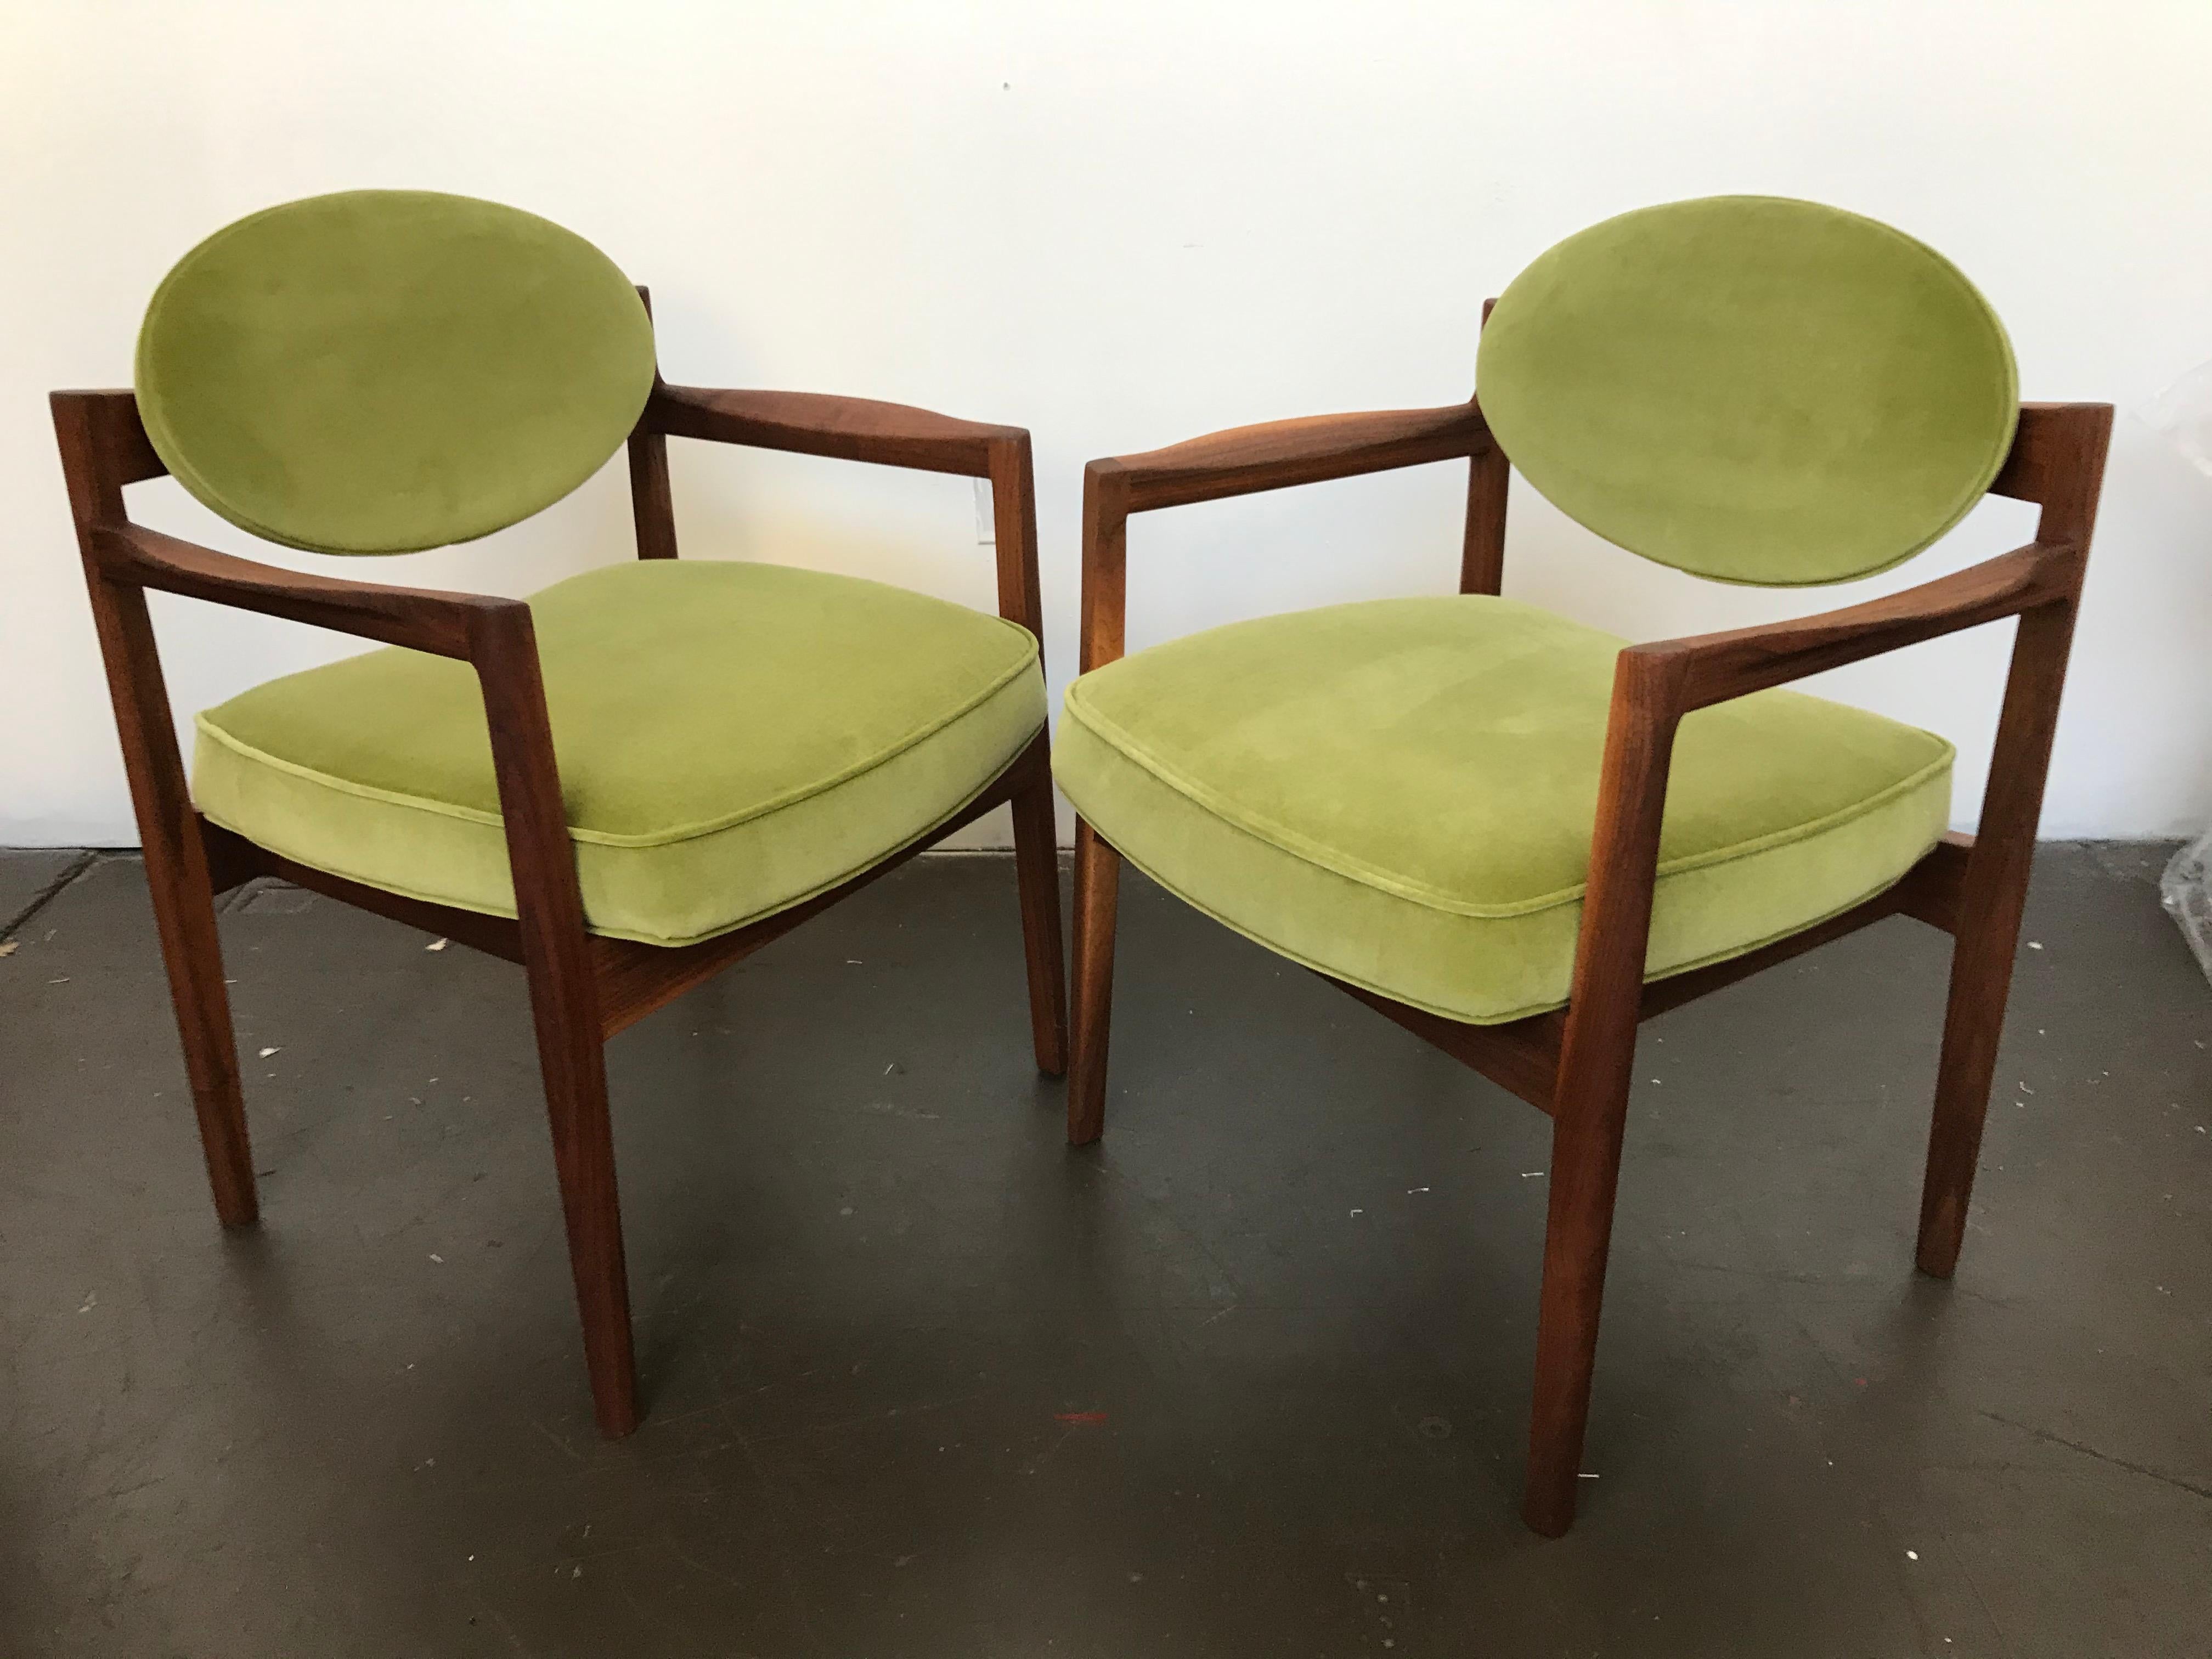 Beautiful set of oval-back armchairs in by Jens Risom designed armchairs, circa 1960s. The refinished oiled walnut frames reveal beautiful woods grain. Re-upholstered in sage green velvet. Nice sculpted flared armrests and floating backs with this